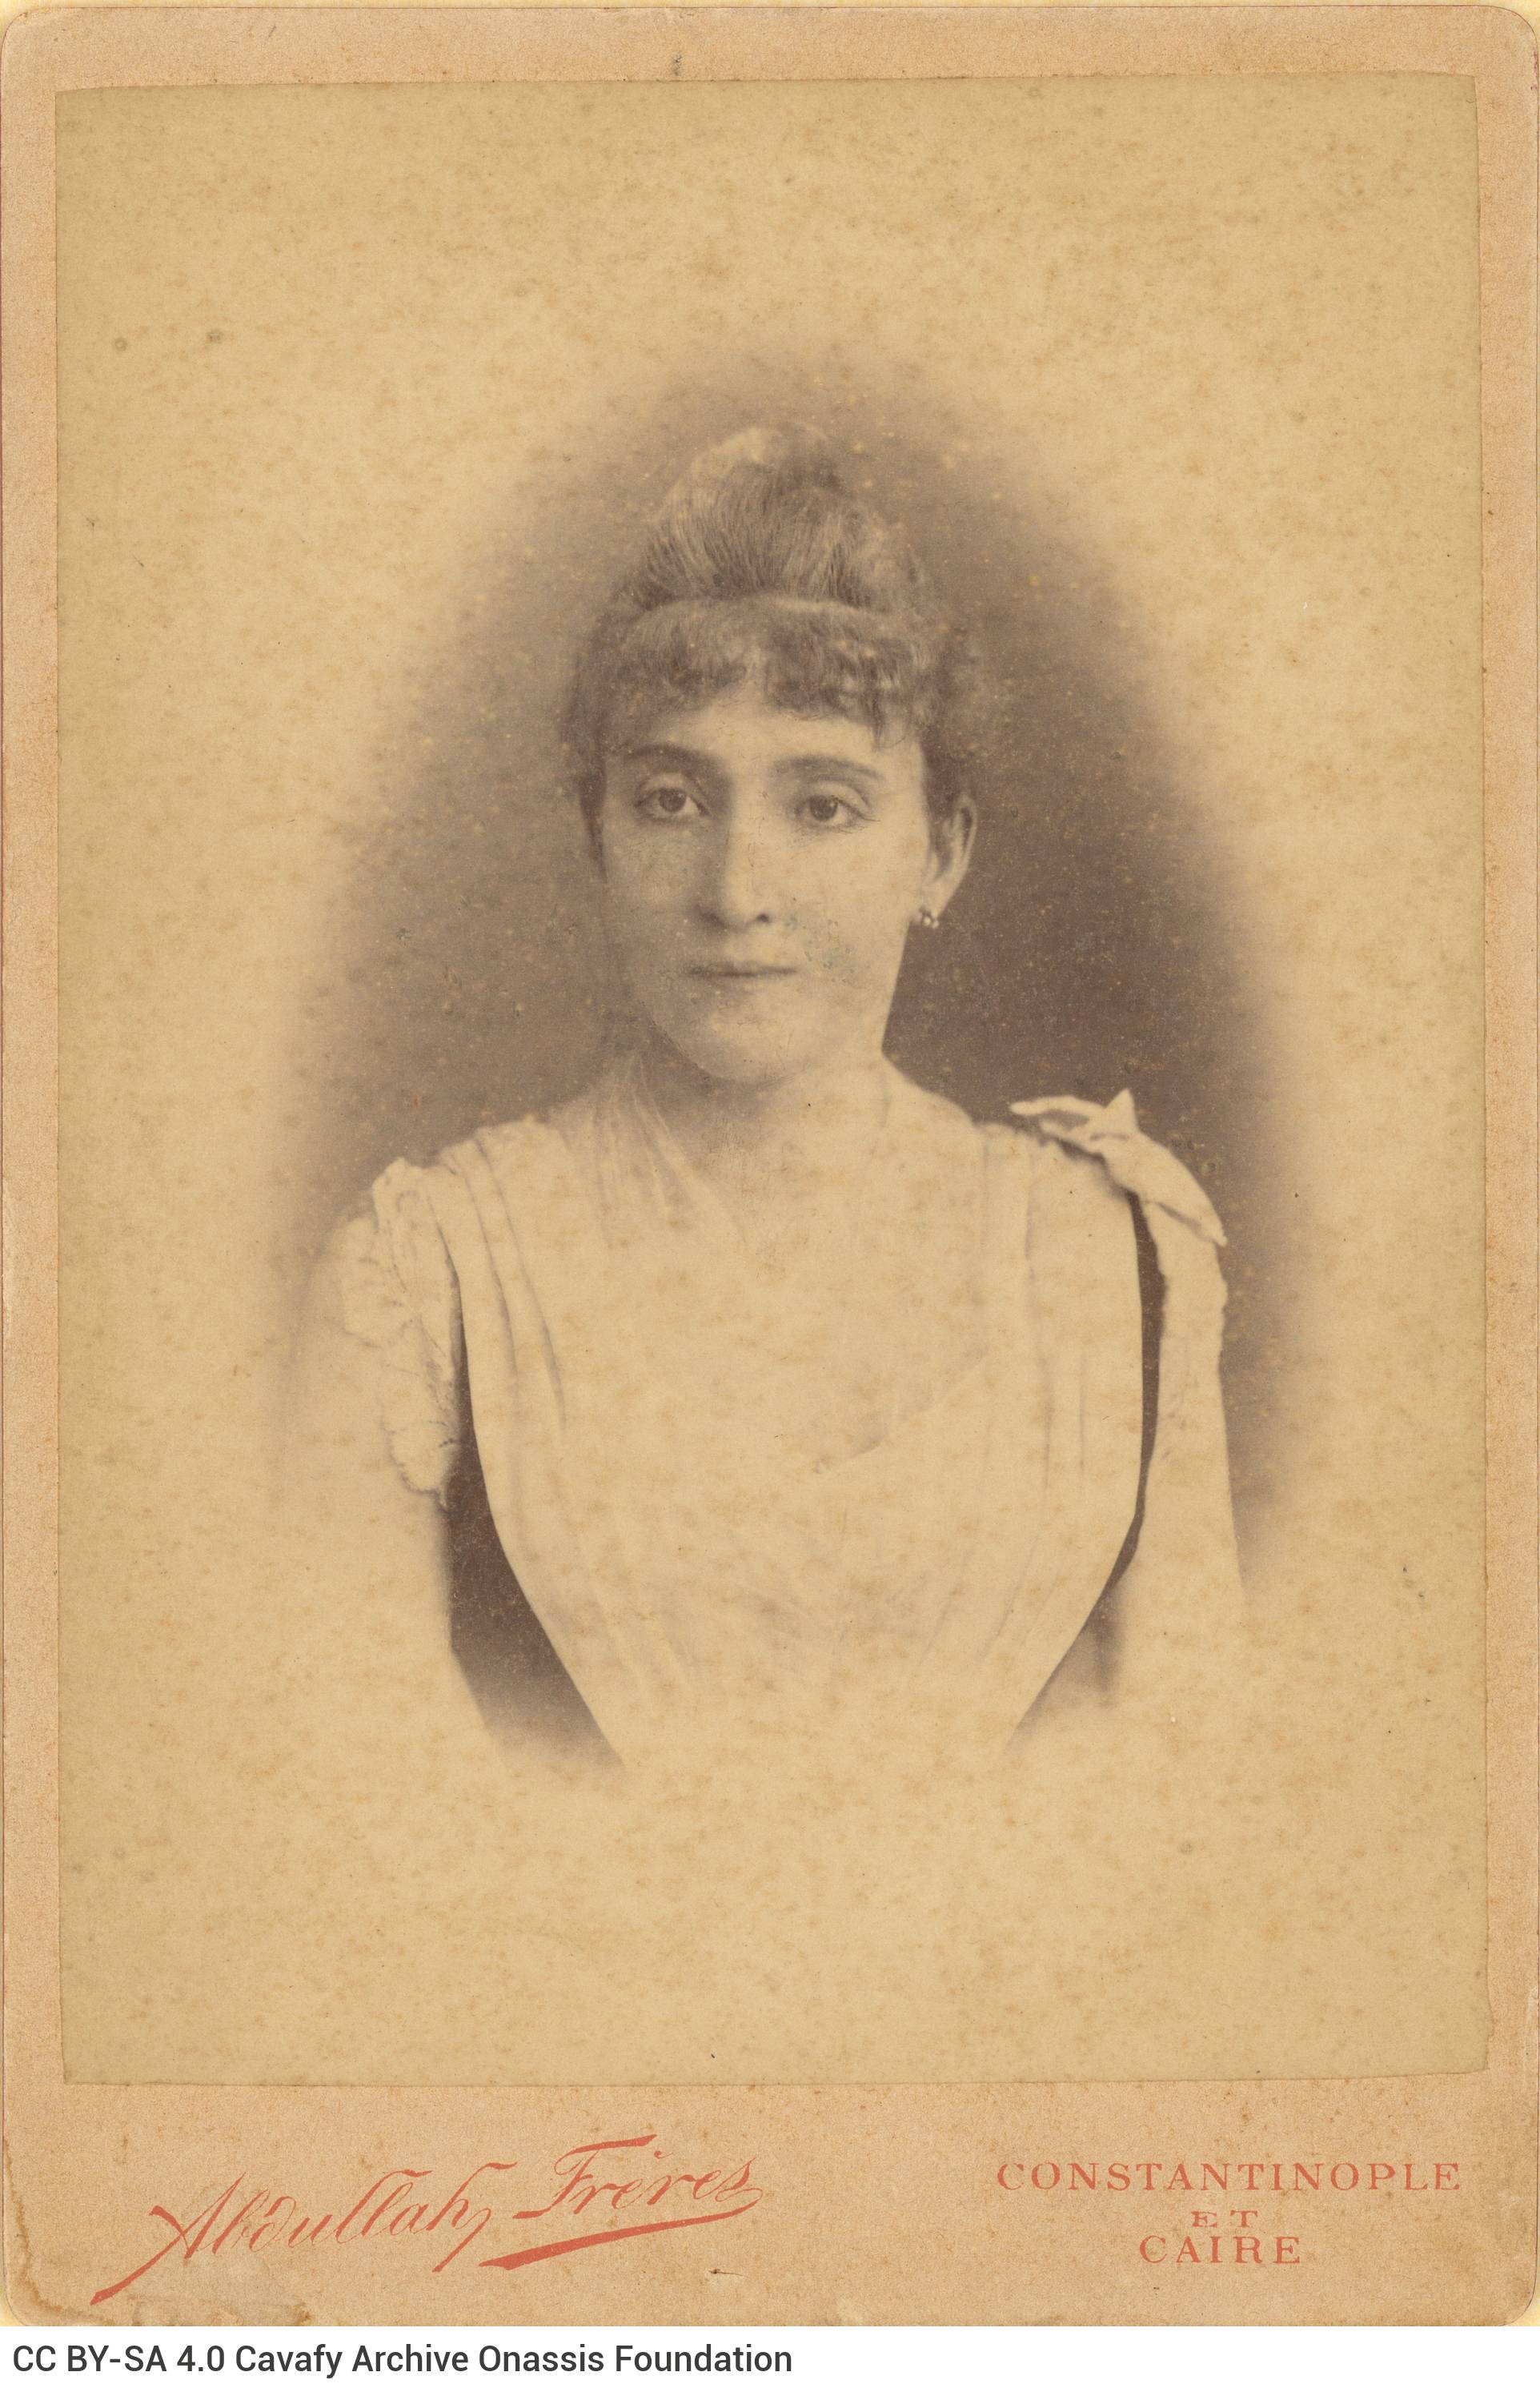 Photographic portrait of the poet's aunt, Euvoulia Papalamprinou, née Fotiadi. The logo of the photo shop in the lower part 